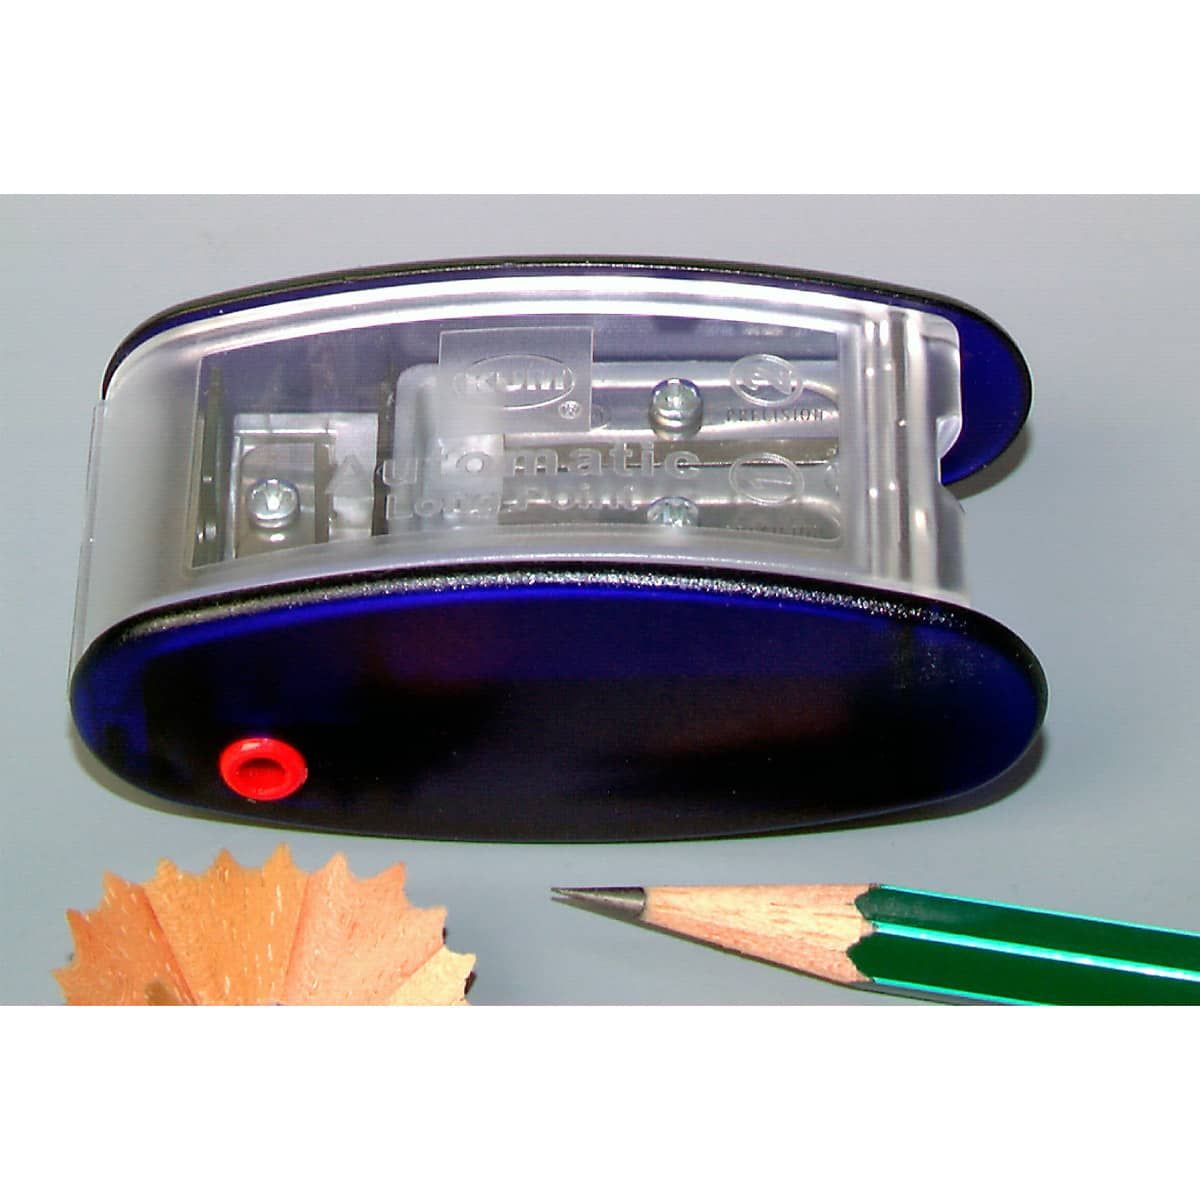 KUM Long Point Pencil Sharpener with Lead Pointer Flip Top